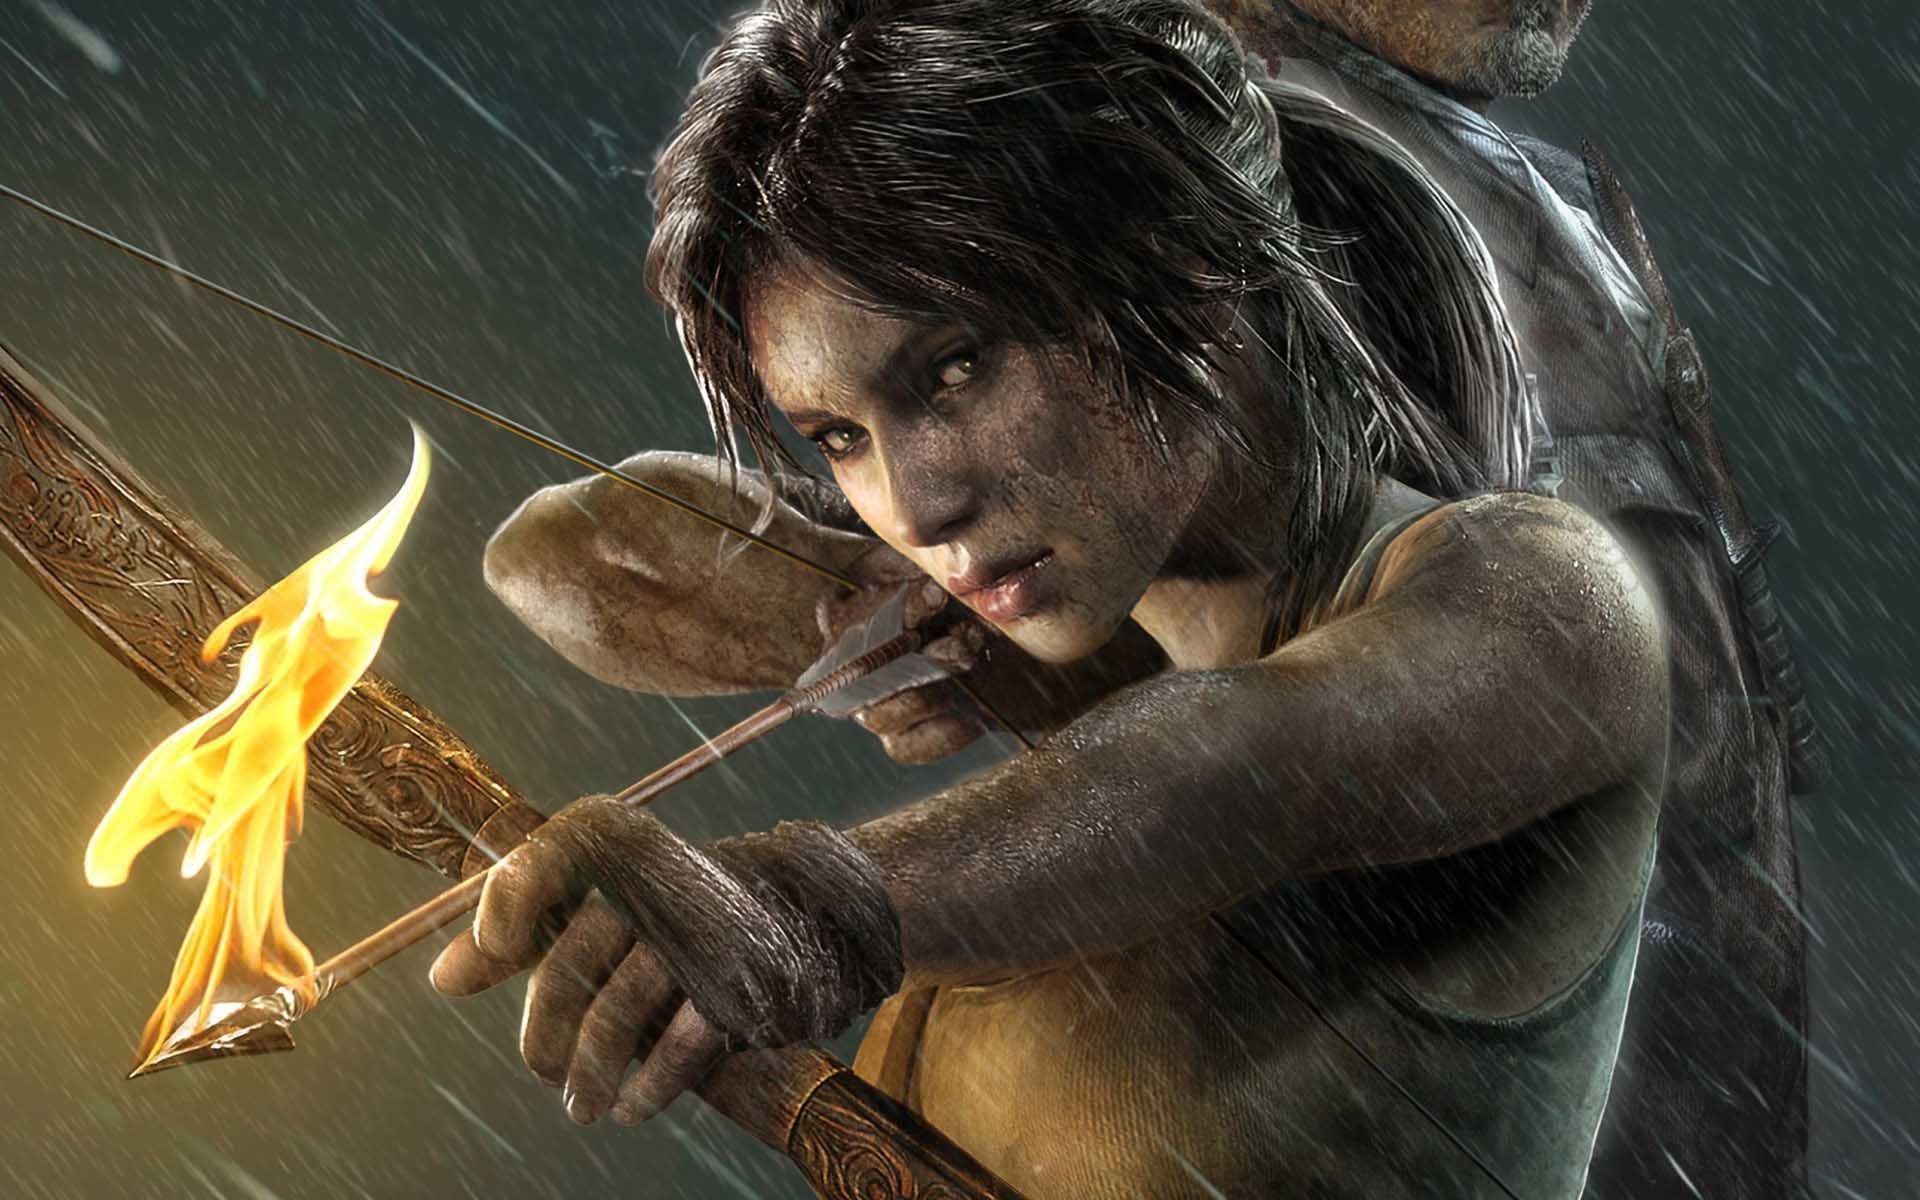 Girl With The Arrow HD. HD Games Wallpaper for Mobile and Desktop